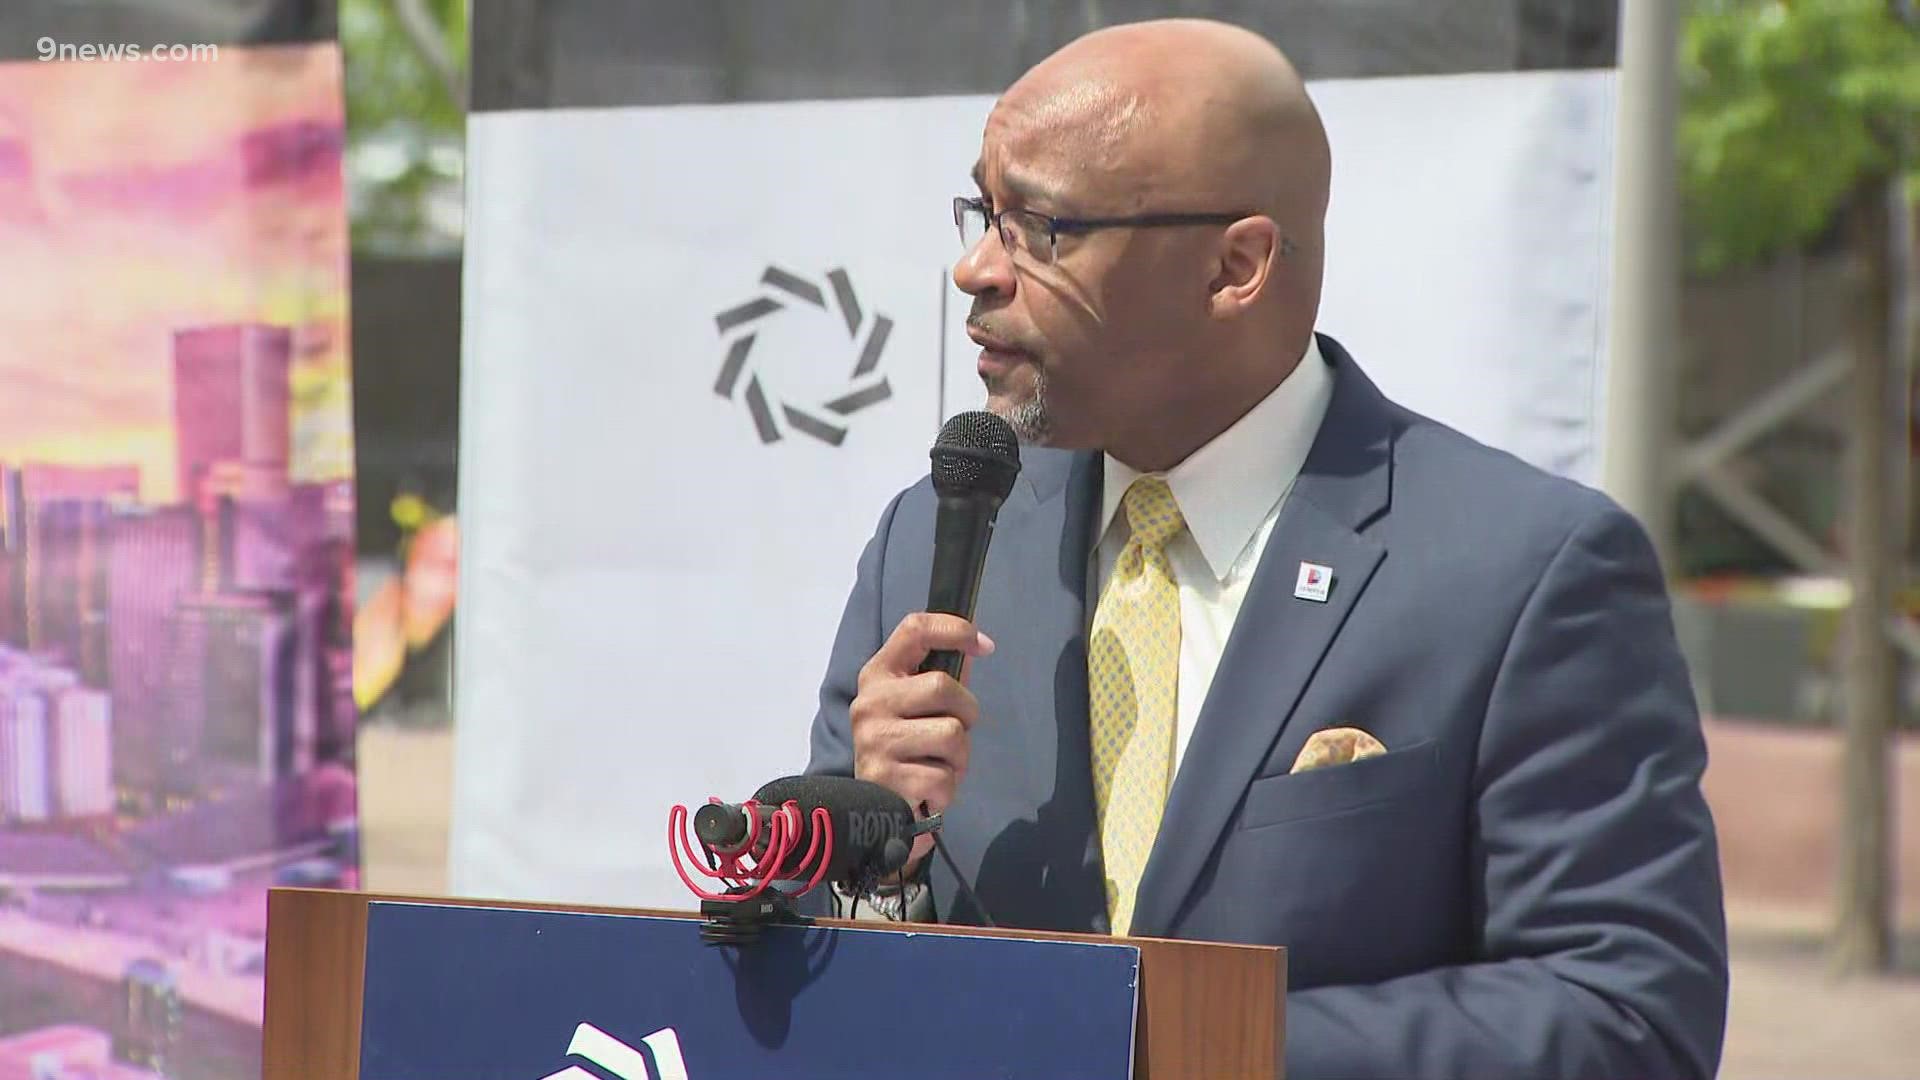 Mayor Hancock and city leaders discussed details of the campaign during a news conference on Wednesday.